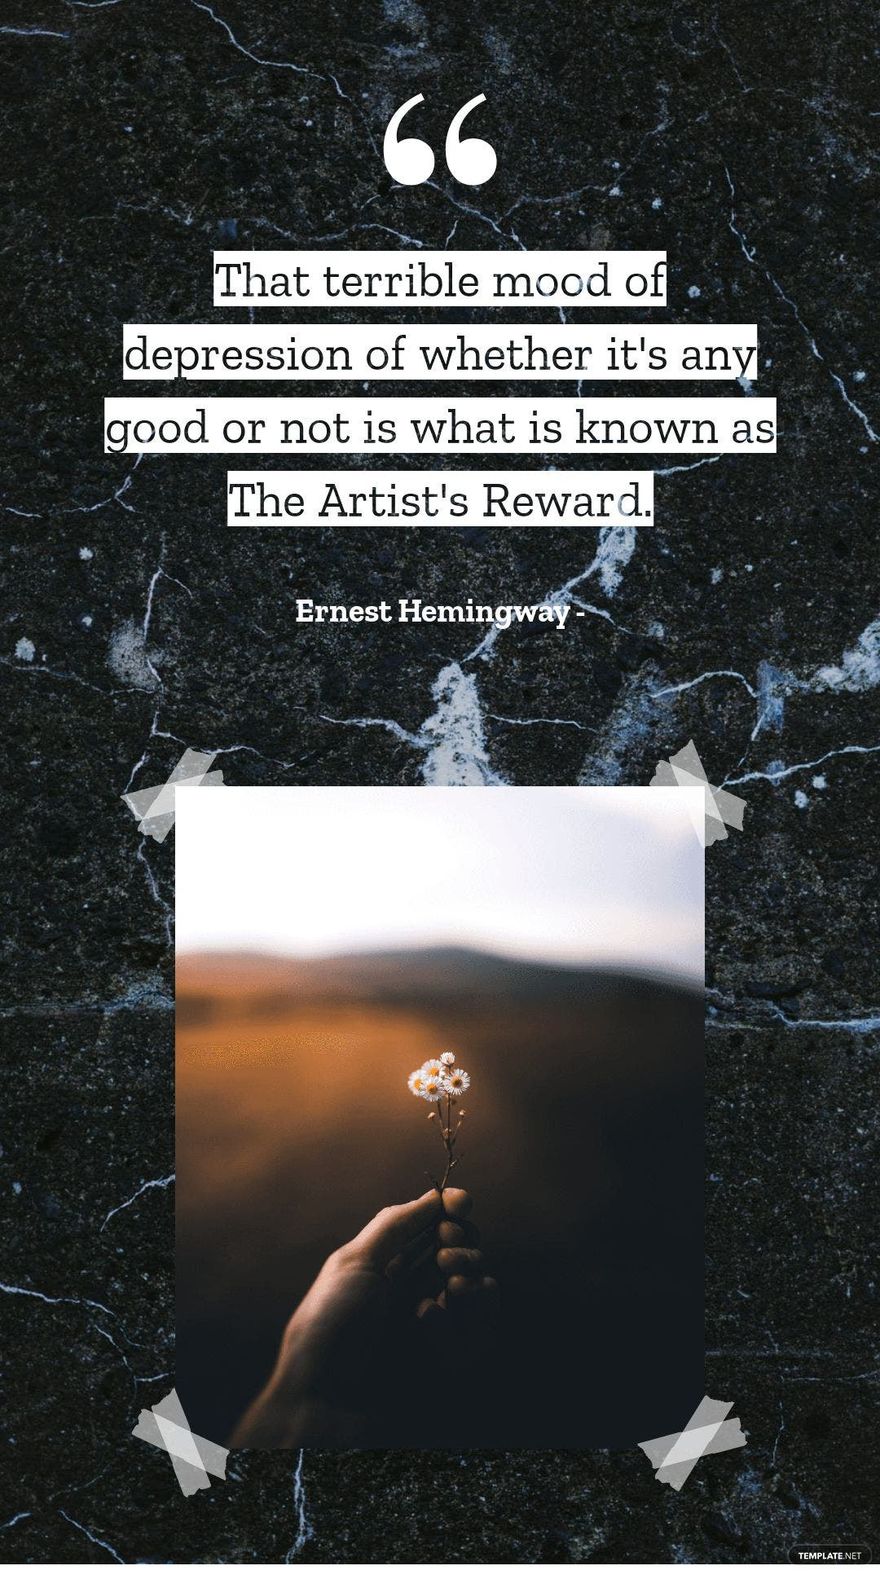 Ernest Hemingway - That terrible mood of depression of whether it's any good or not is what is known as The Artist's Reward.